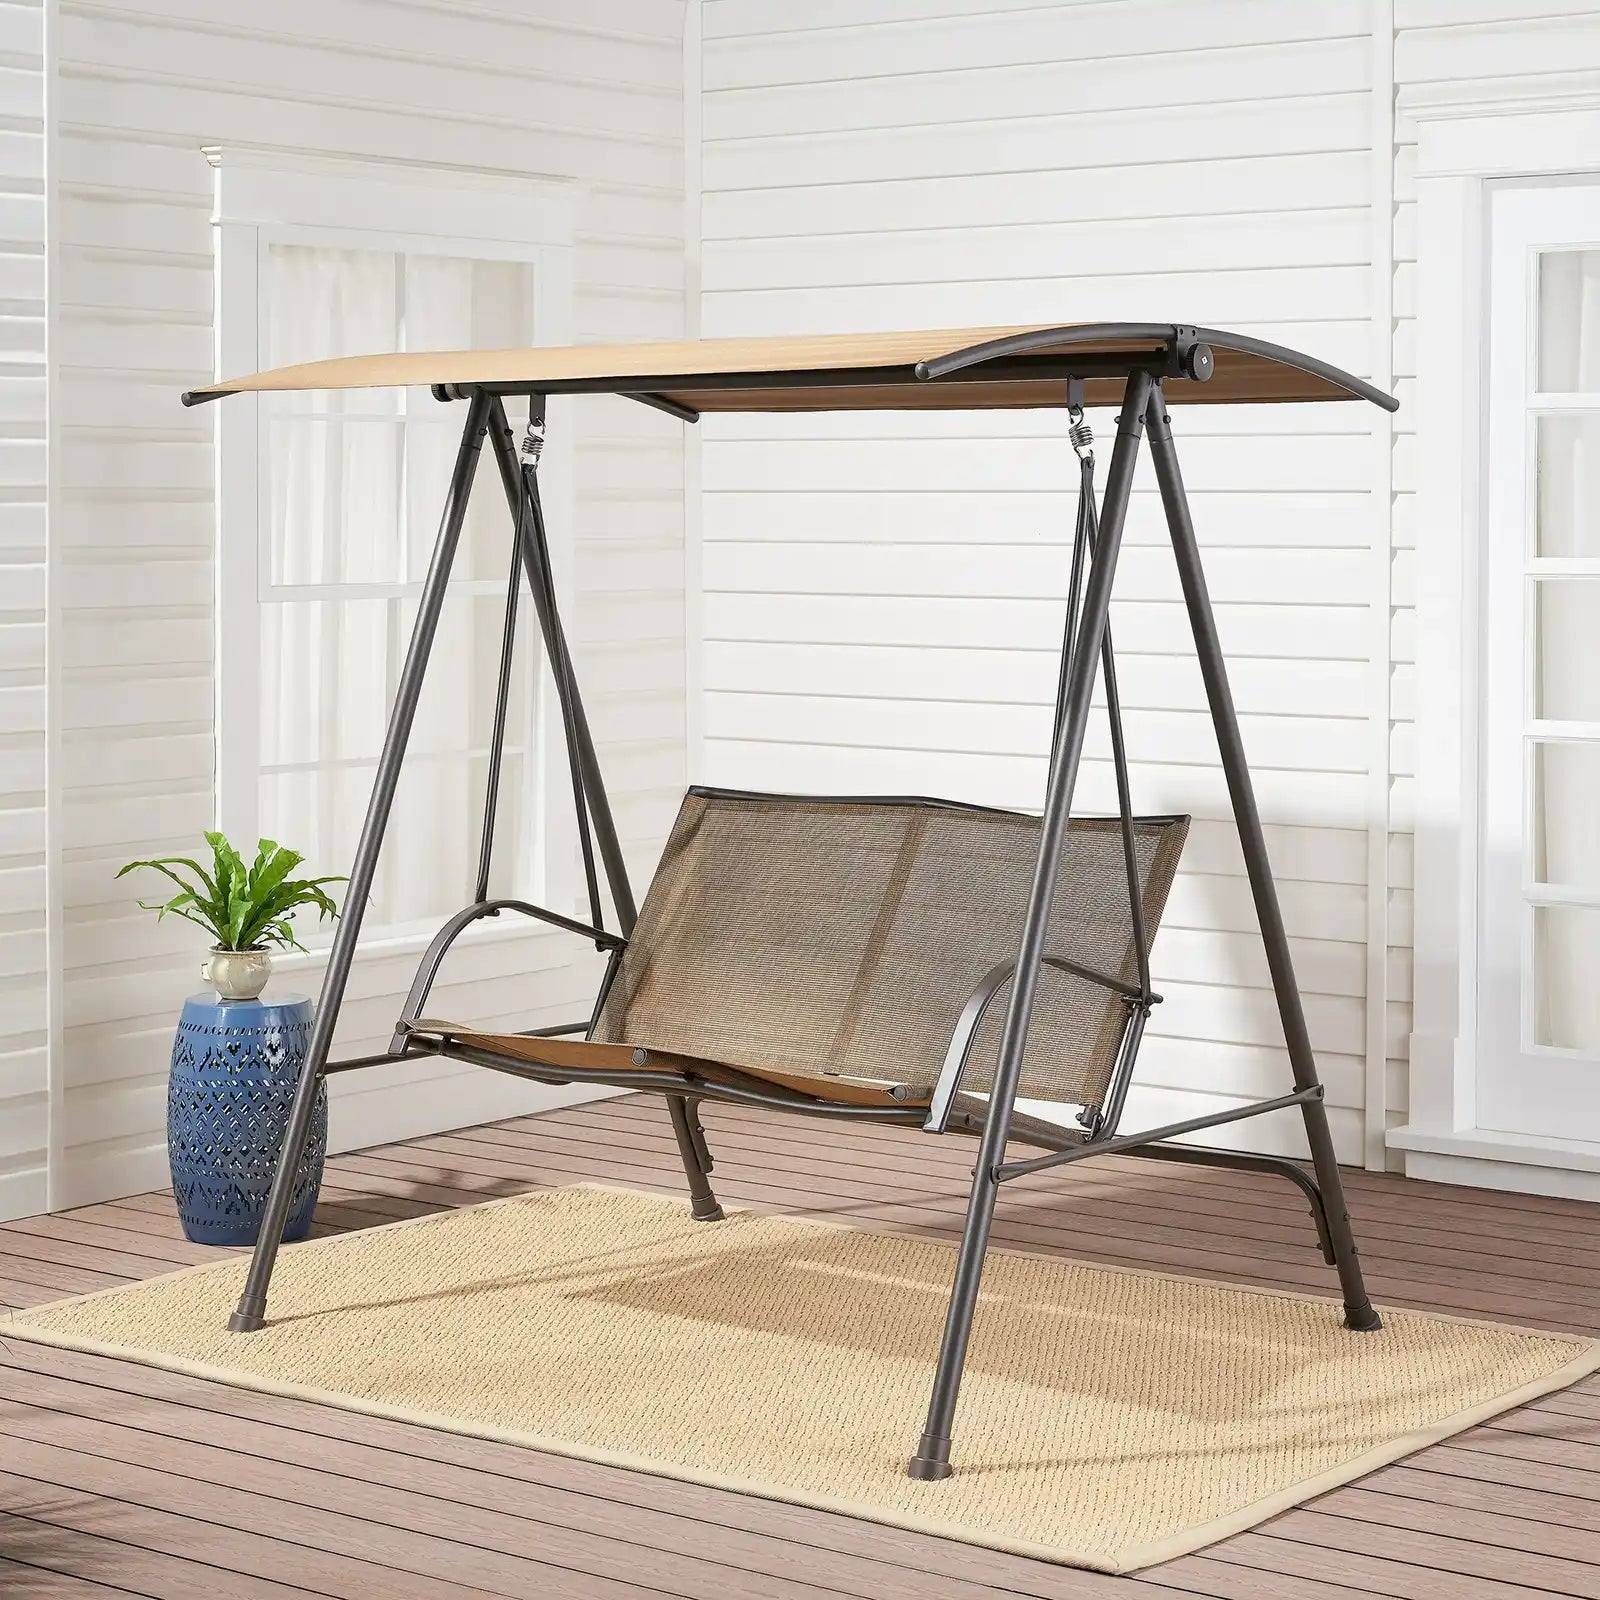 2-Person Canopy Porch Swing | Durable Steel Frame | Weather-Resistant Fabric | Easy Assembly | Perfect for Outdoor Comfort